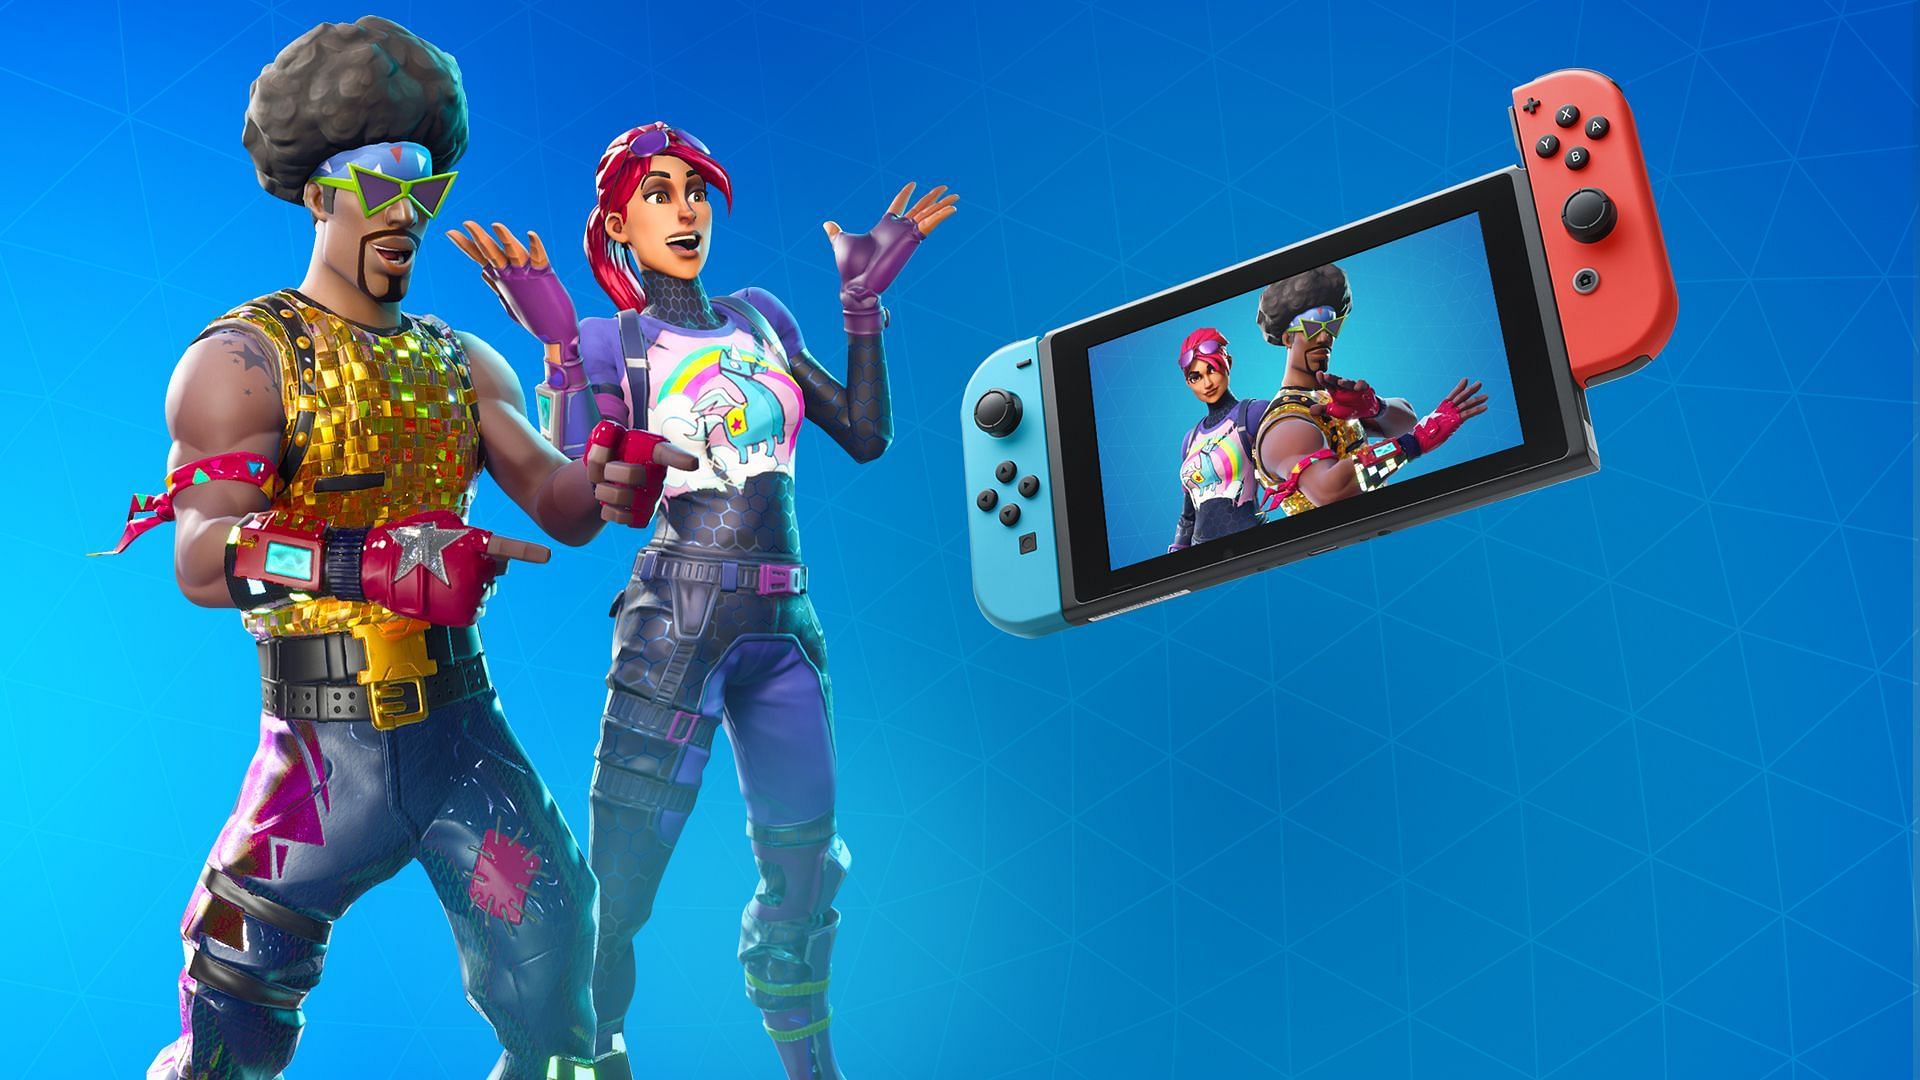 &quot;Fortnite on Nintendo Switch is literally unfair and unplayable&quot;: Community irked by the game